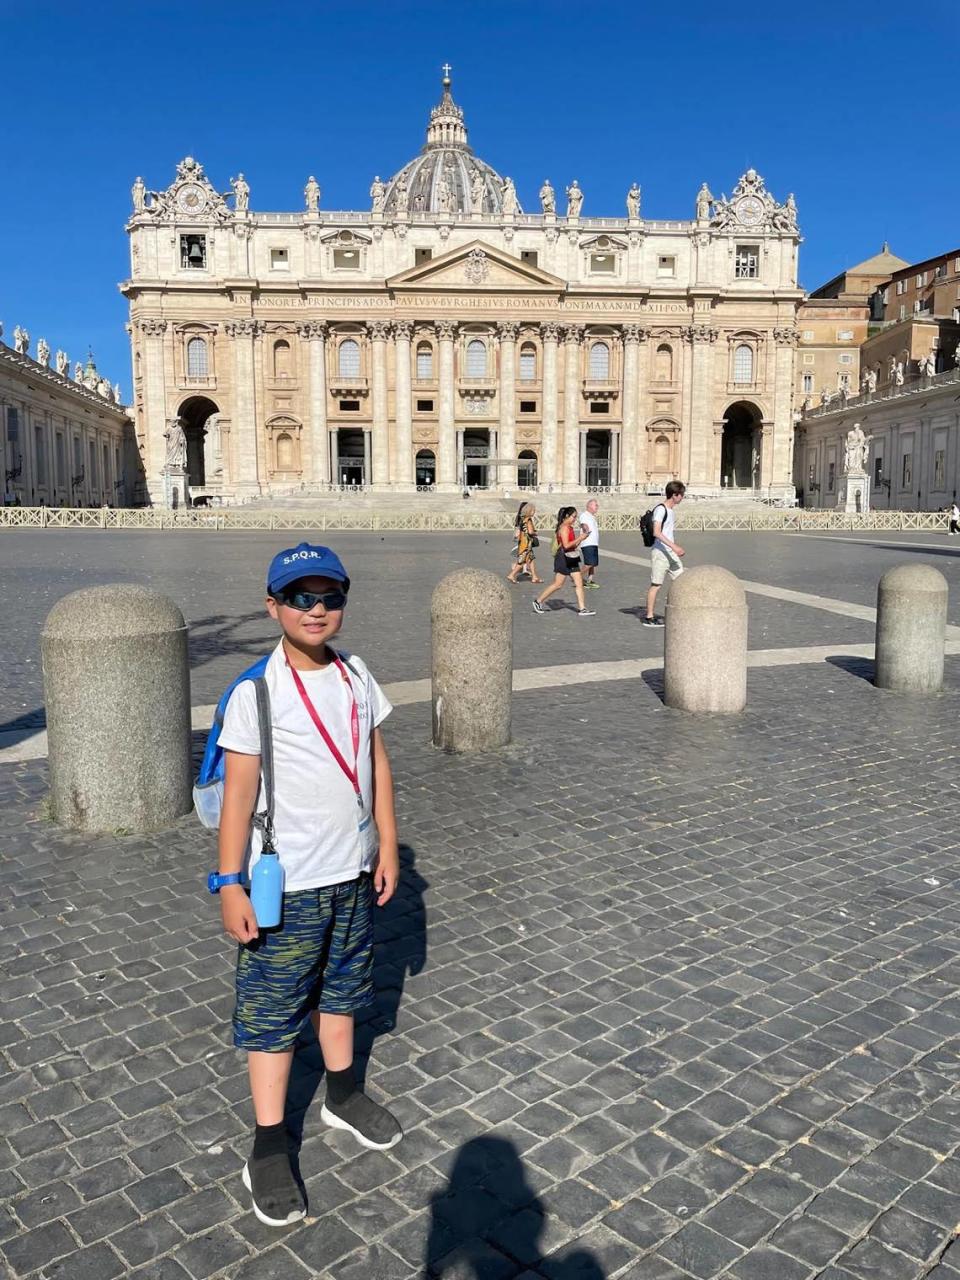 Augustine Wang-Zhao, a 9-year-old student at Bishop’s Peak Elementary School, competed in the International History Olympiad in Rome in August, placing fifth in the International History Bowl and second in the Hextathlon. Here, he’s pictured outside St. Peter’s Basilica at the Vatican.